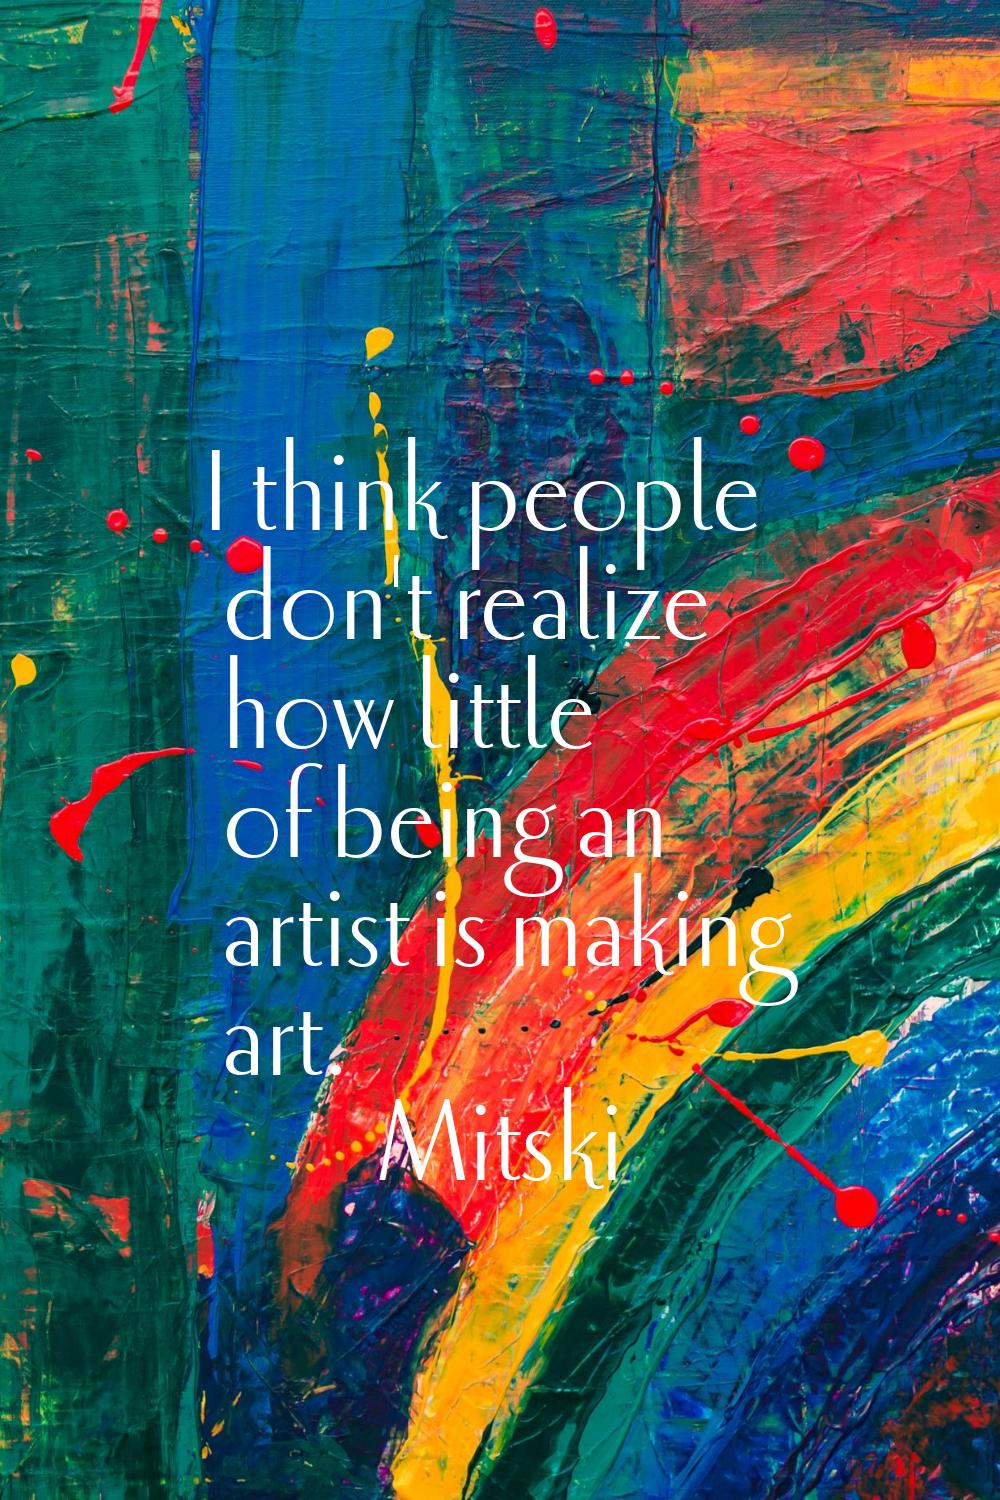 I think people don't realize how little of being an artist is making art.